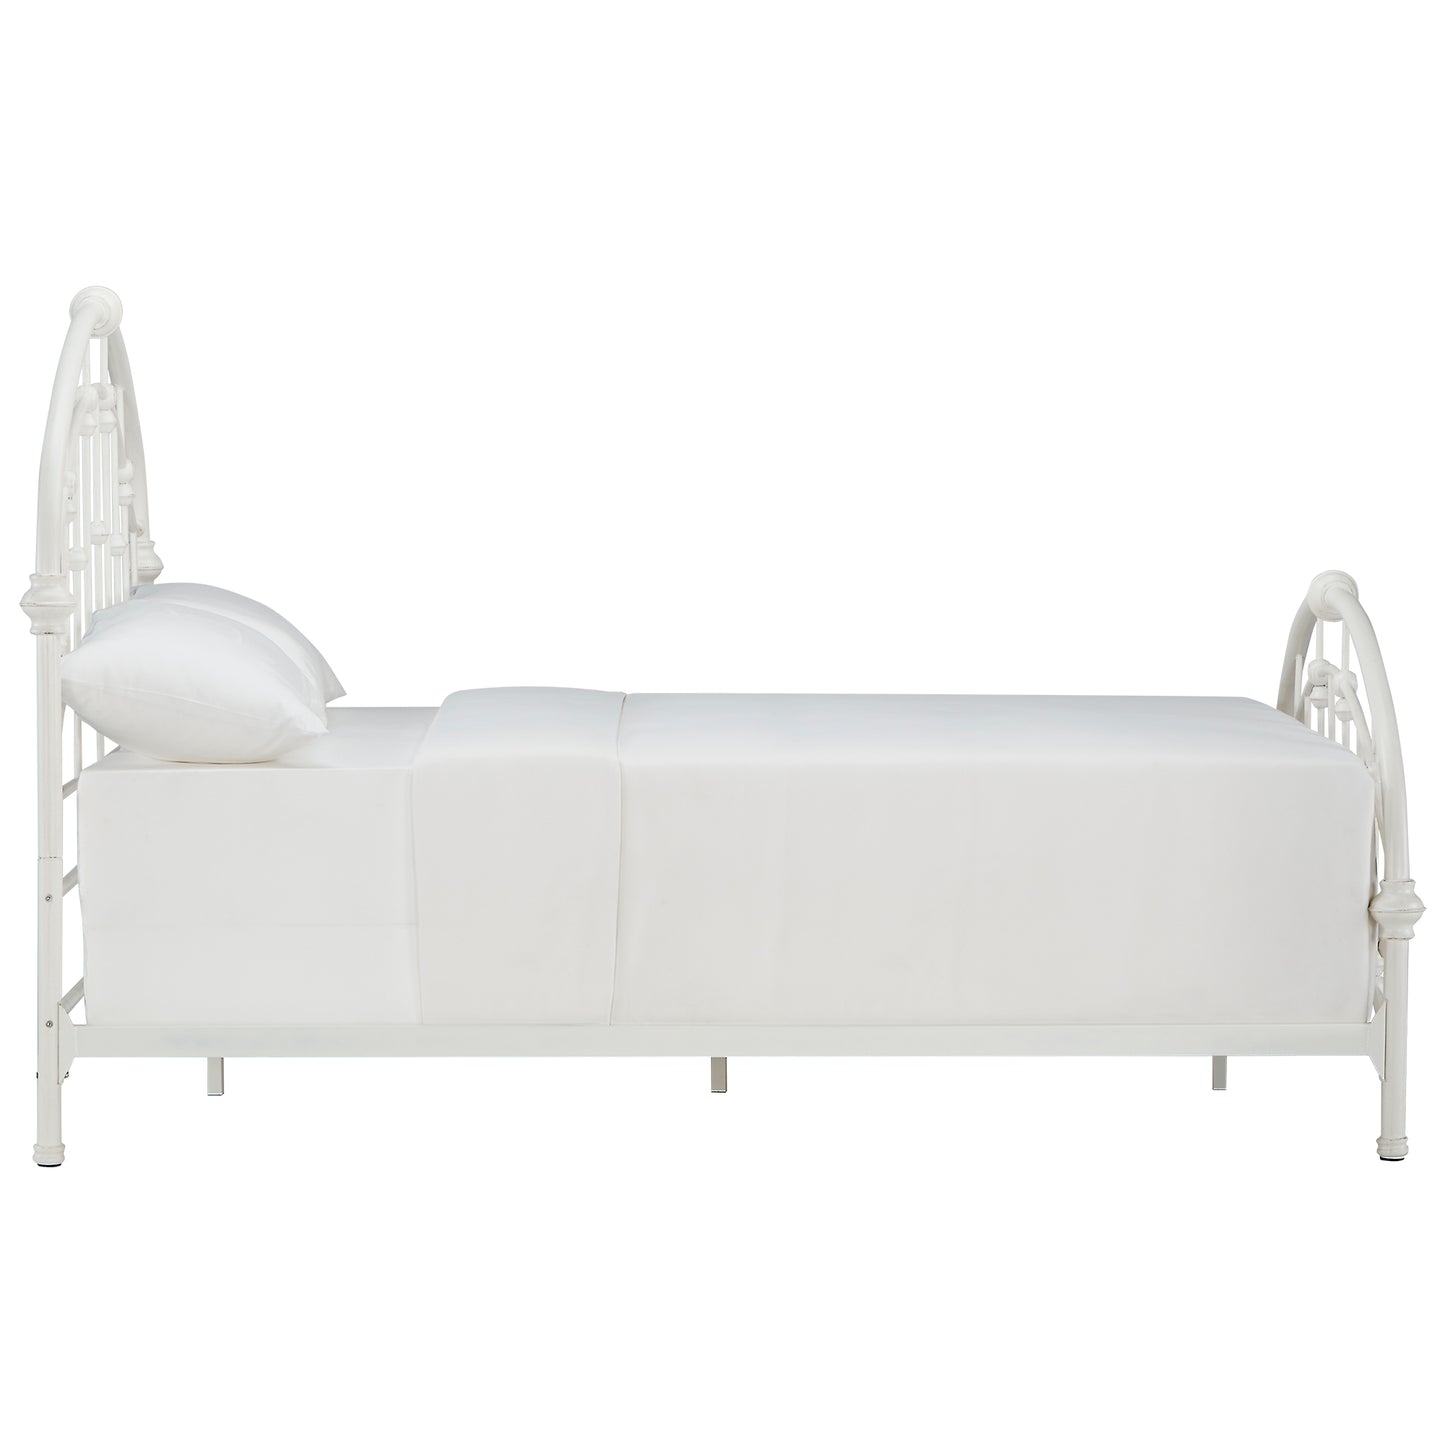 Curved Double Top Arches Victorian Iron Bed - Antique White, Queen Size